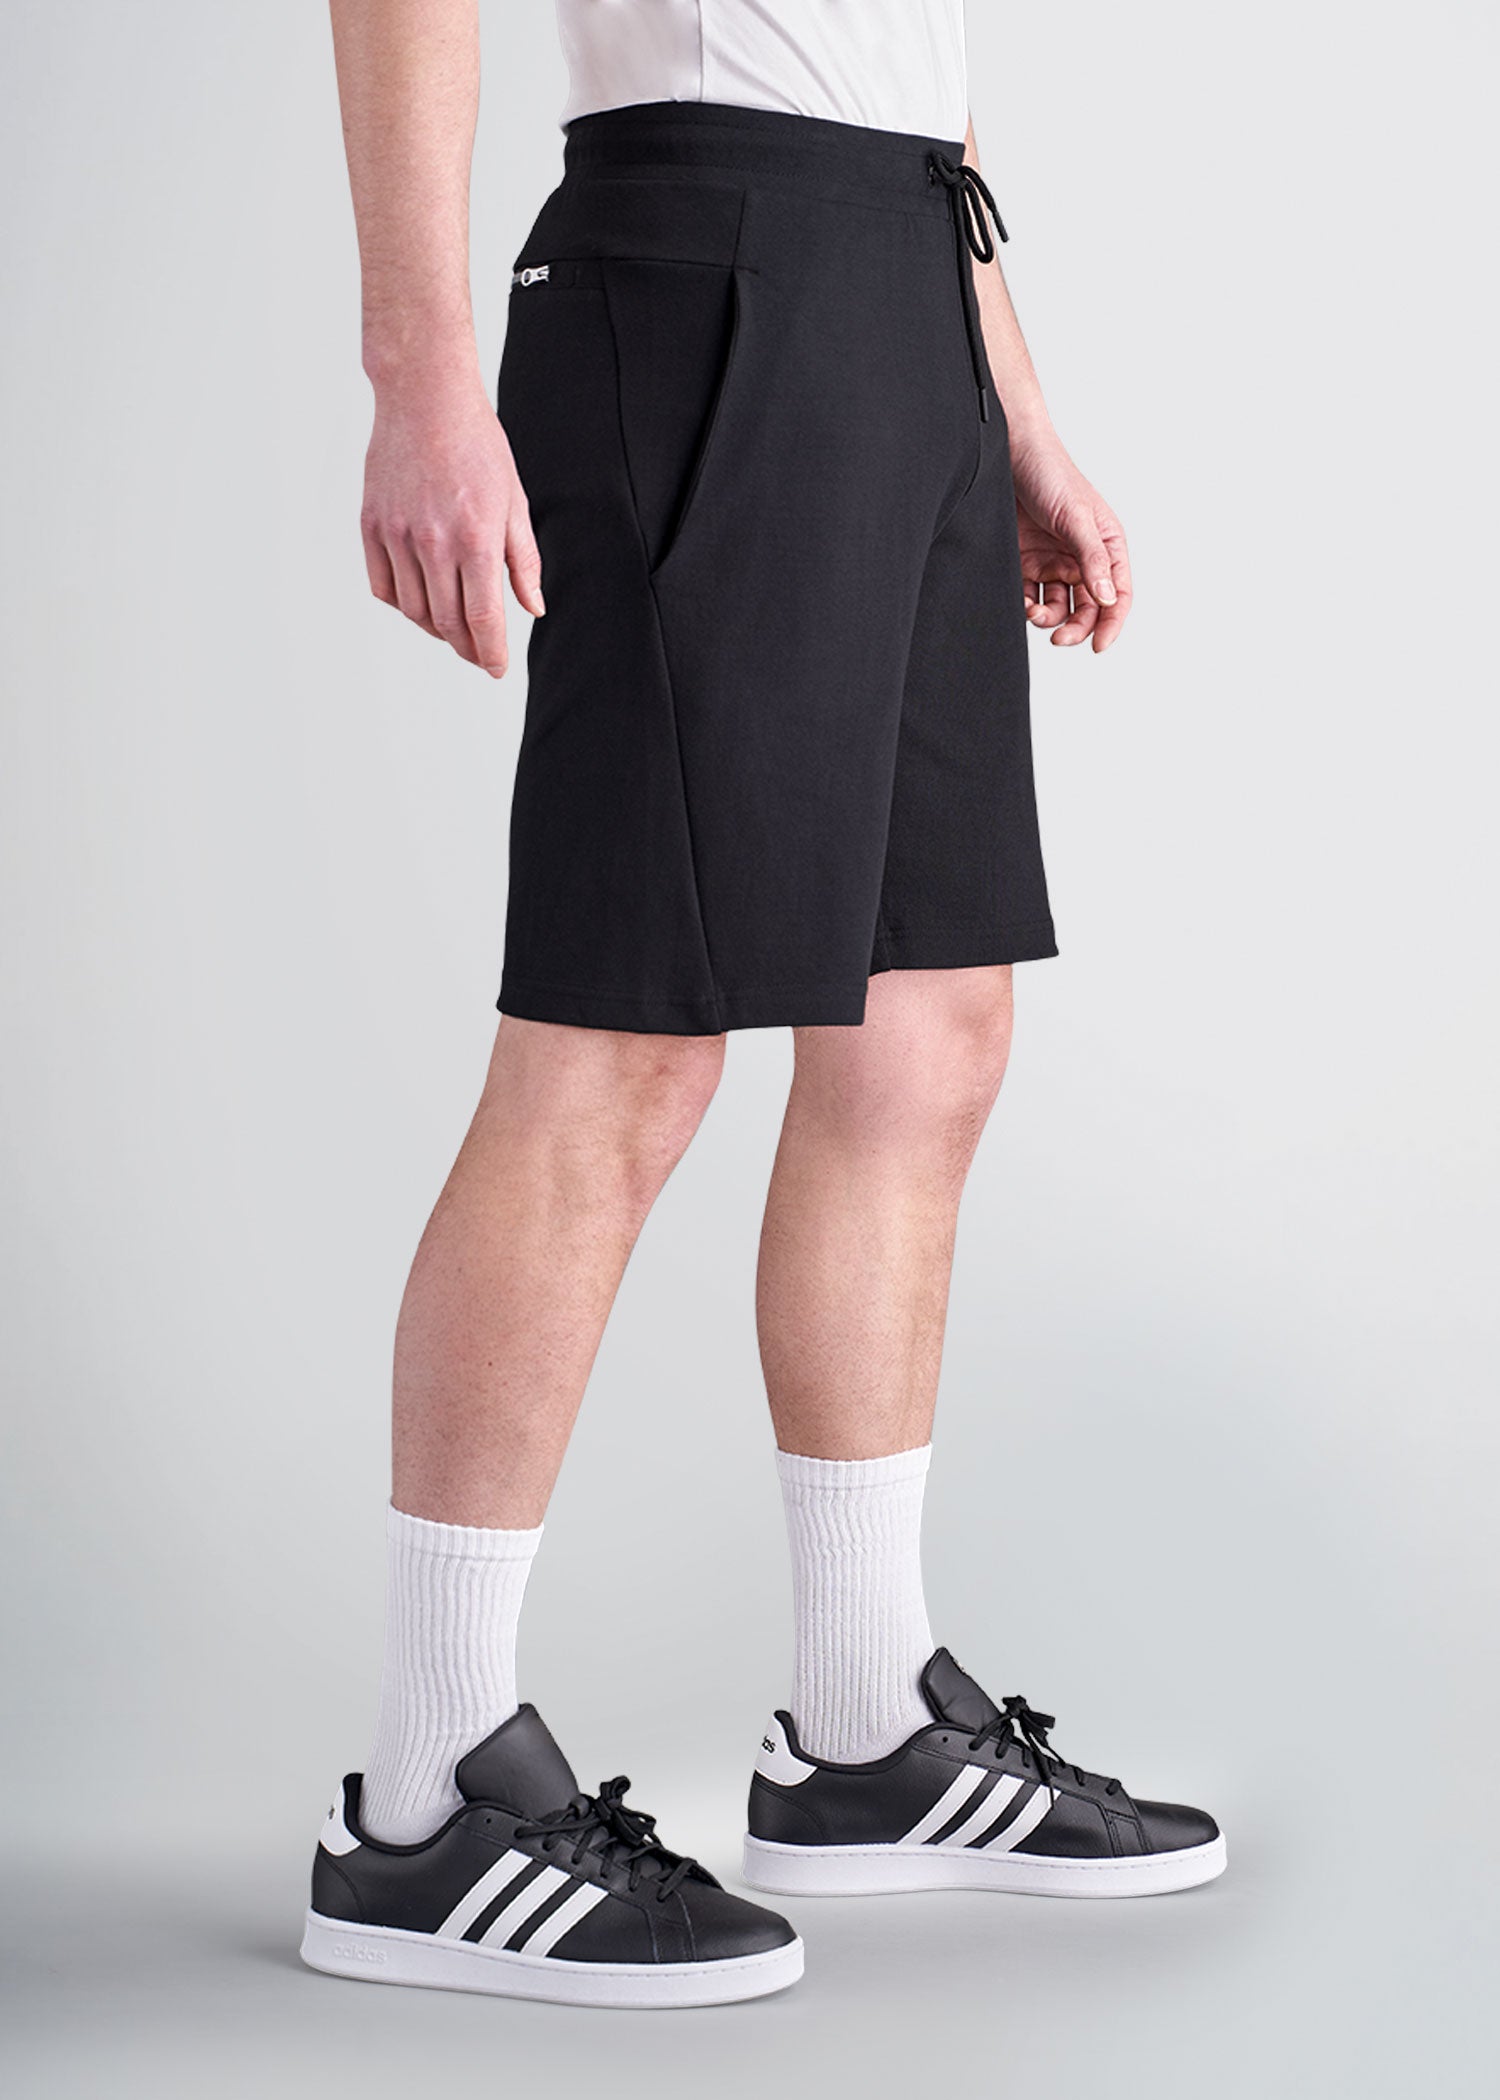 american-tall-mens-knit-athletic-shorts-black-side